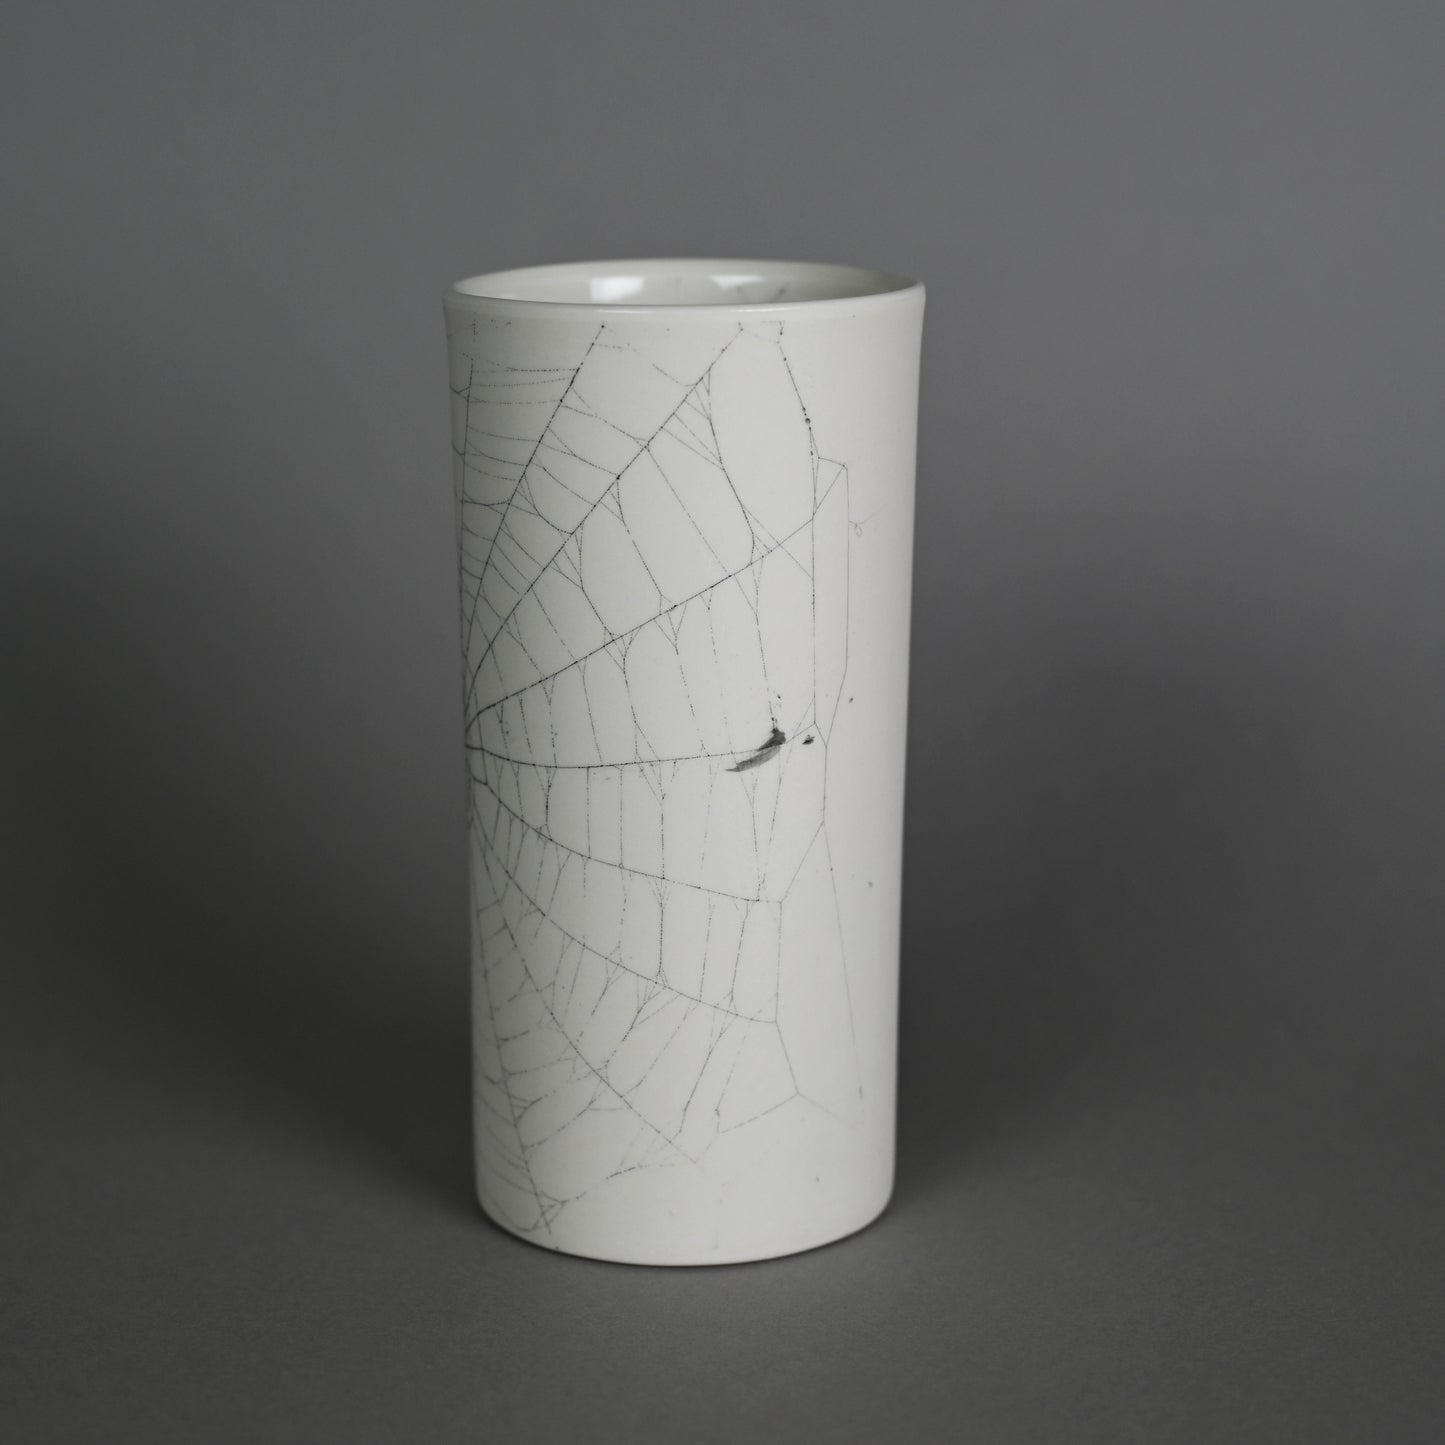 Web on Clay (186), Collected September 24, 2022